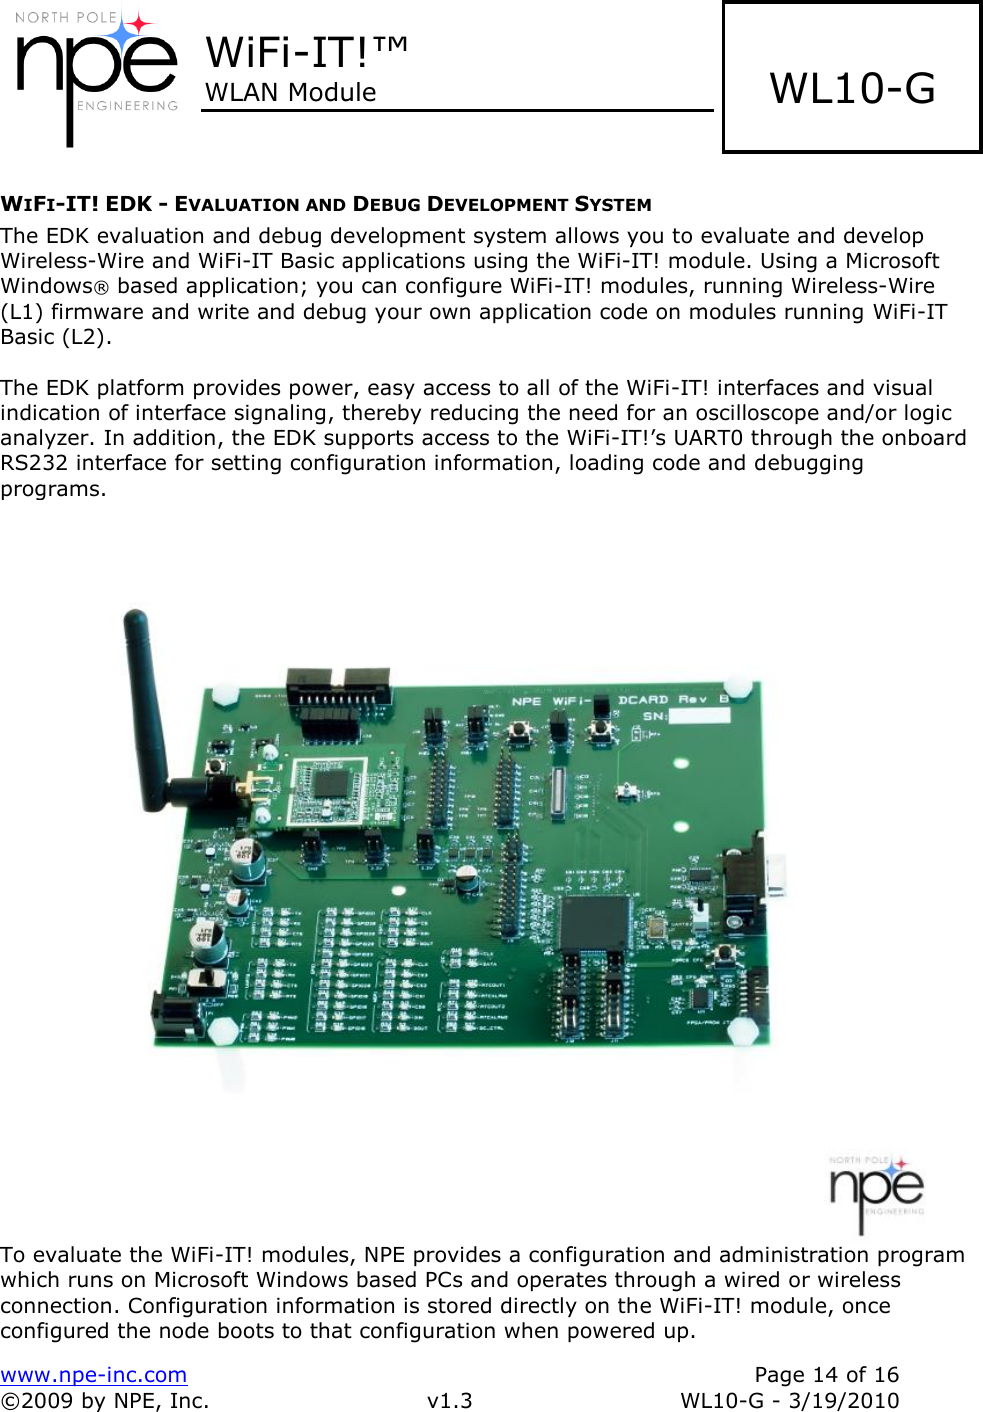  WiFi-IT!™ WLAN Module    www.npe-inc.com    Page 14 of 16 ©2009 by NPE, Inc.  v1.3  WL10-G - 3/19/2010    WL10-G WIFI-IT! EDK - EVALUATION AND DEBUG DEVELOPMENT SYSTEM The EDK evaluation and debug development system allows you to evaluate and develop Wireless-Wire and WiFi-IT Basic applications using the WiFi-IT! module. Using a Microsoft Windows® based application; you can configure WiFi-IT! modules, running Wireless-Wire (L1) firmware and write and debug your own application code on modules running WiFi-IT Basic (L2).   The EDK platform provides power, easy access to all of the WiFi-IT! interfaces and visual indication of interface signaling, thereby reducing the need for an oscilloscope and/or logic analyzer. In addition, the EDK supports access to the WiFi-IT!’s UART0 through the onboard RS232 interface for setting configuration information, loading code and debugging programs.  To evaluate the WiFi-IT! modules, NPE provides a configuration and administration program which runs on Microsoft Windows based PCs and operates through a wired or wireless connection. Configuration information is stored directly on the WiFi-IT! module, once configured the node boots to that configuration when powered up.  